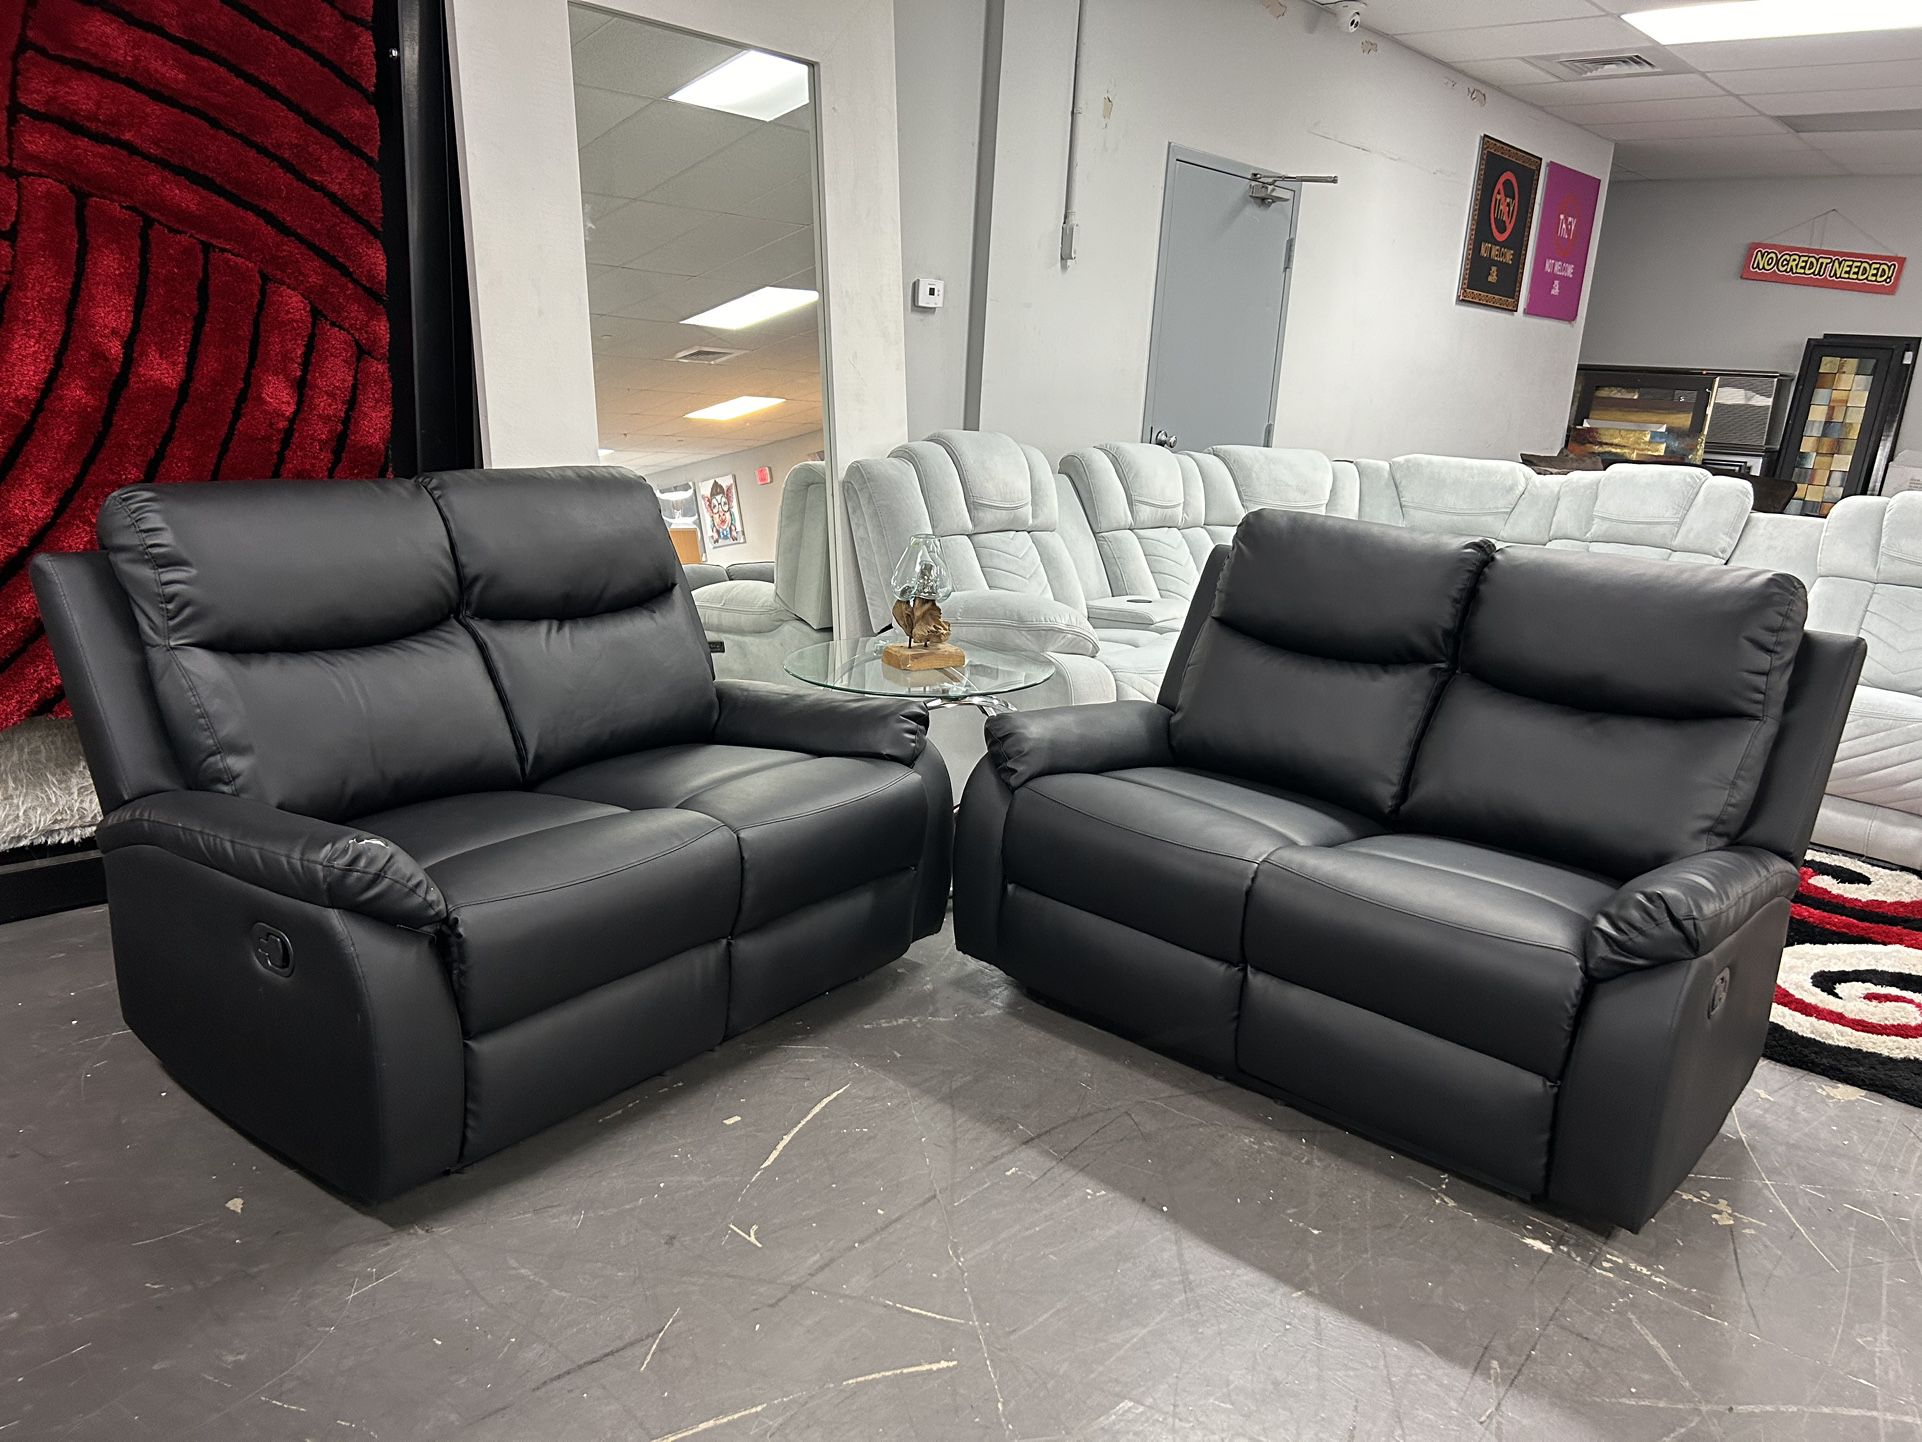 SOFA LIVING ROOM SET ON CLEARANCE STORE CLOSING EVERYTHING MUST GO!!!!**** 